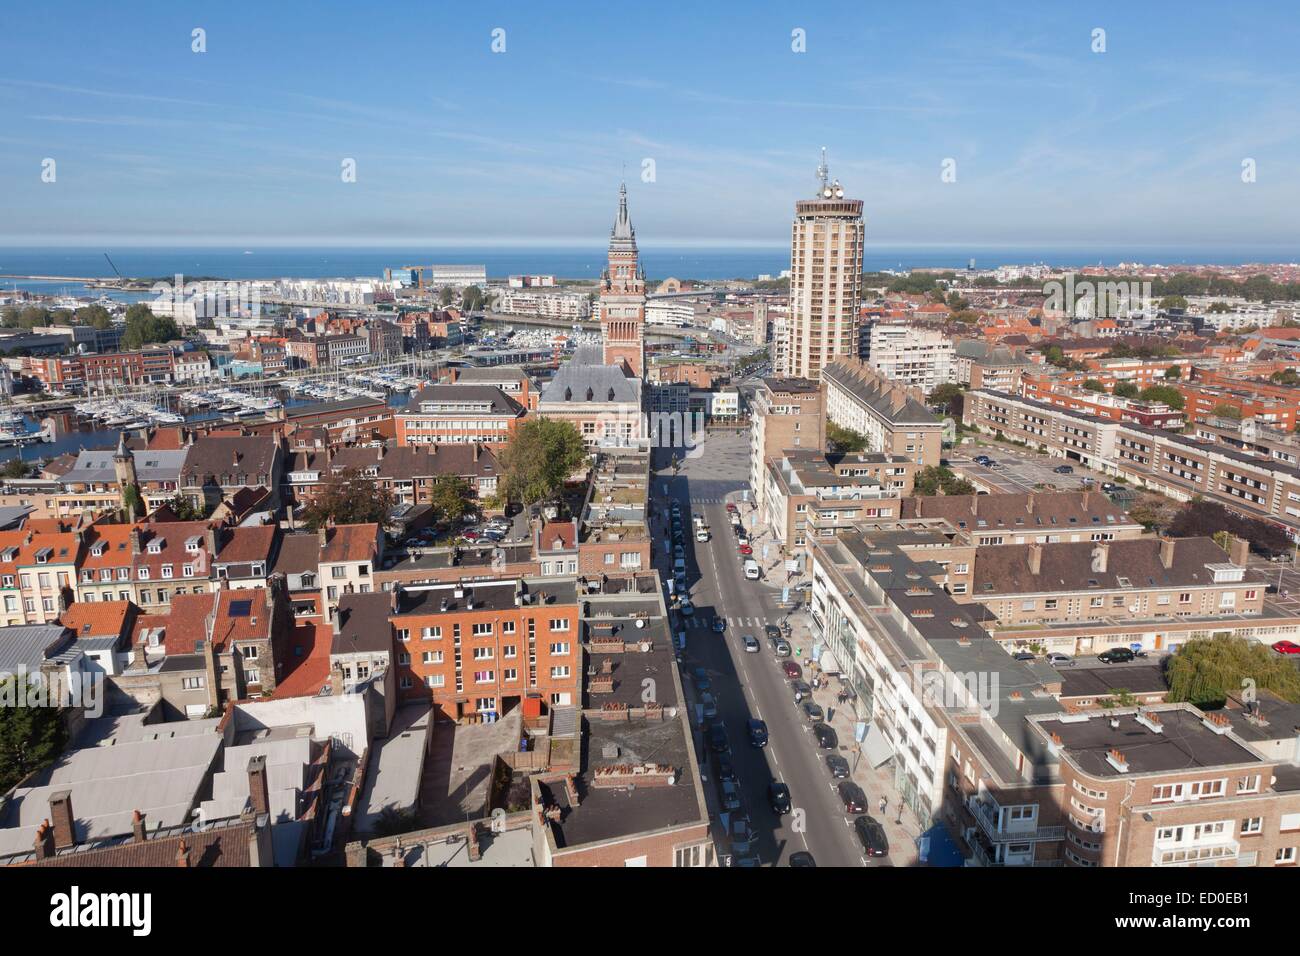 France, Nord, Dunkirk, view of the city, the belfry of the town hall listed as World Heritage by UNESCO and the North Sea Stock Photo